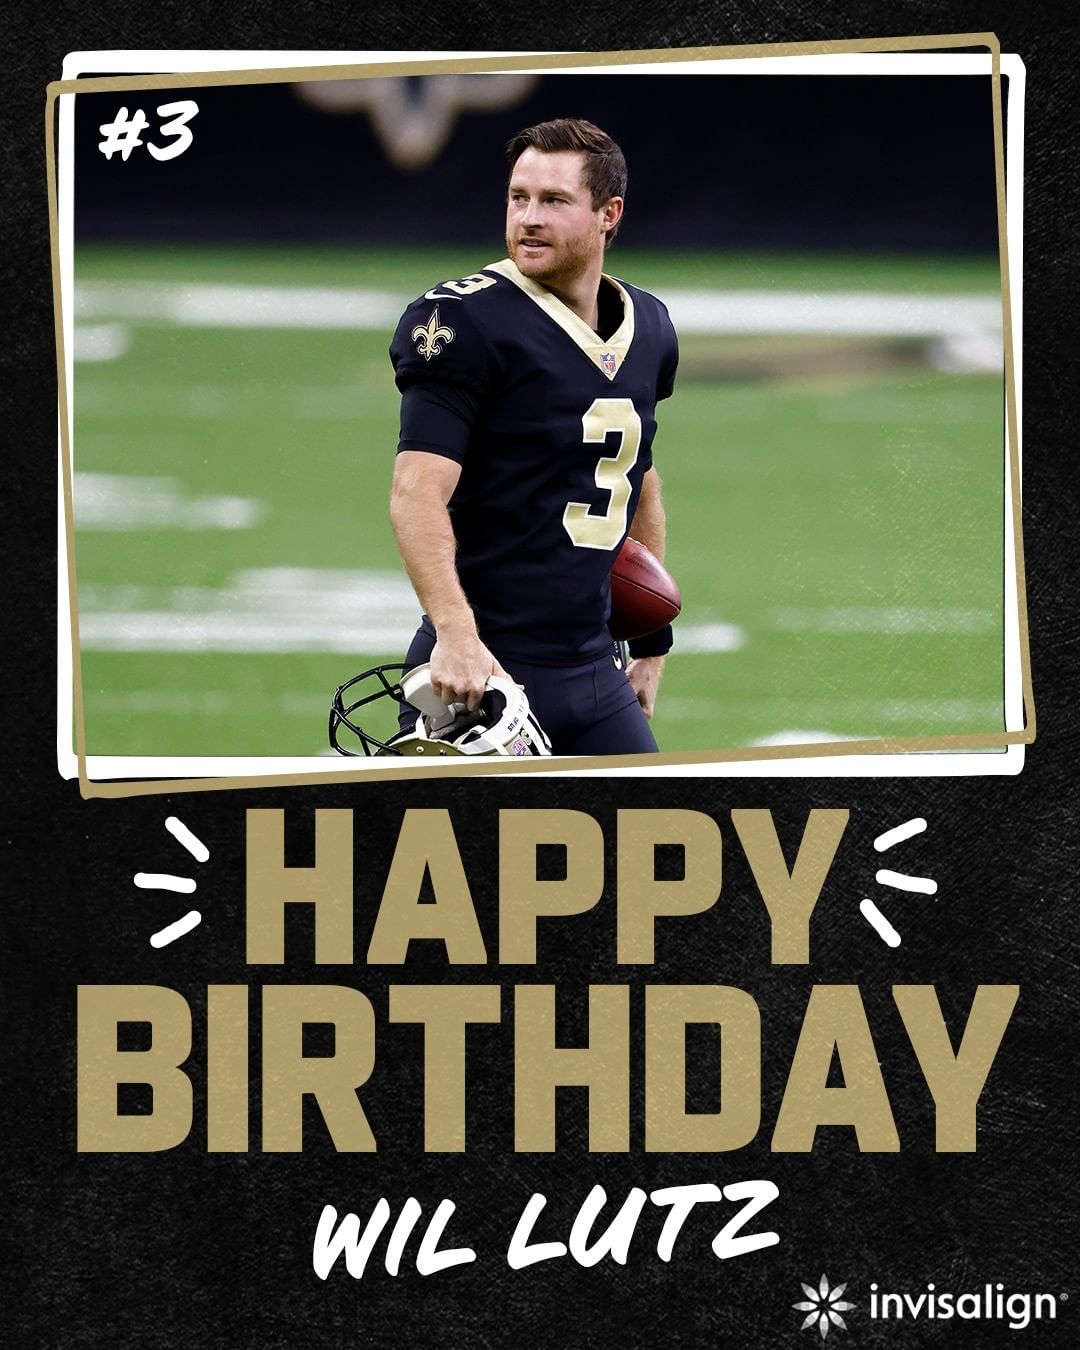 Hope you have a great day, @wil_lutz5!...